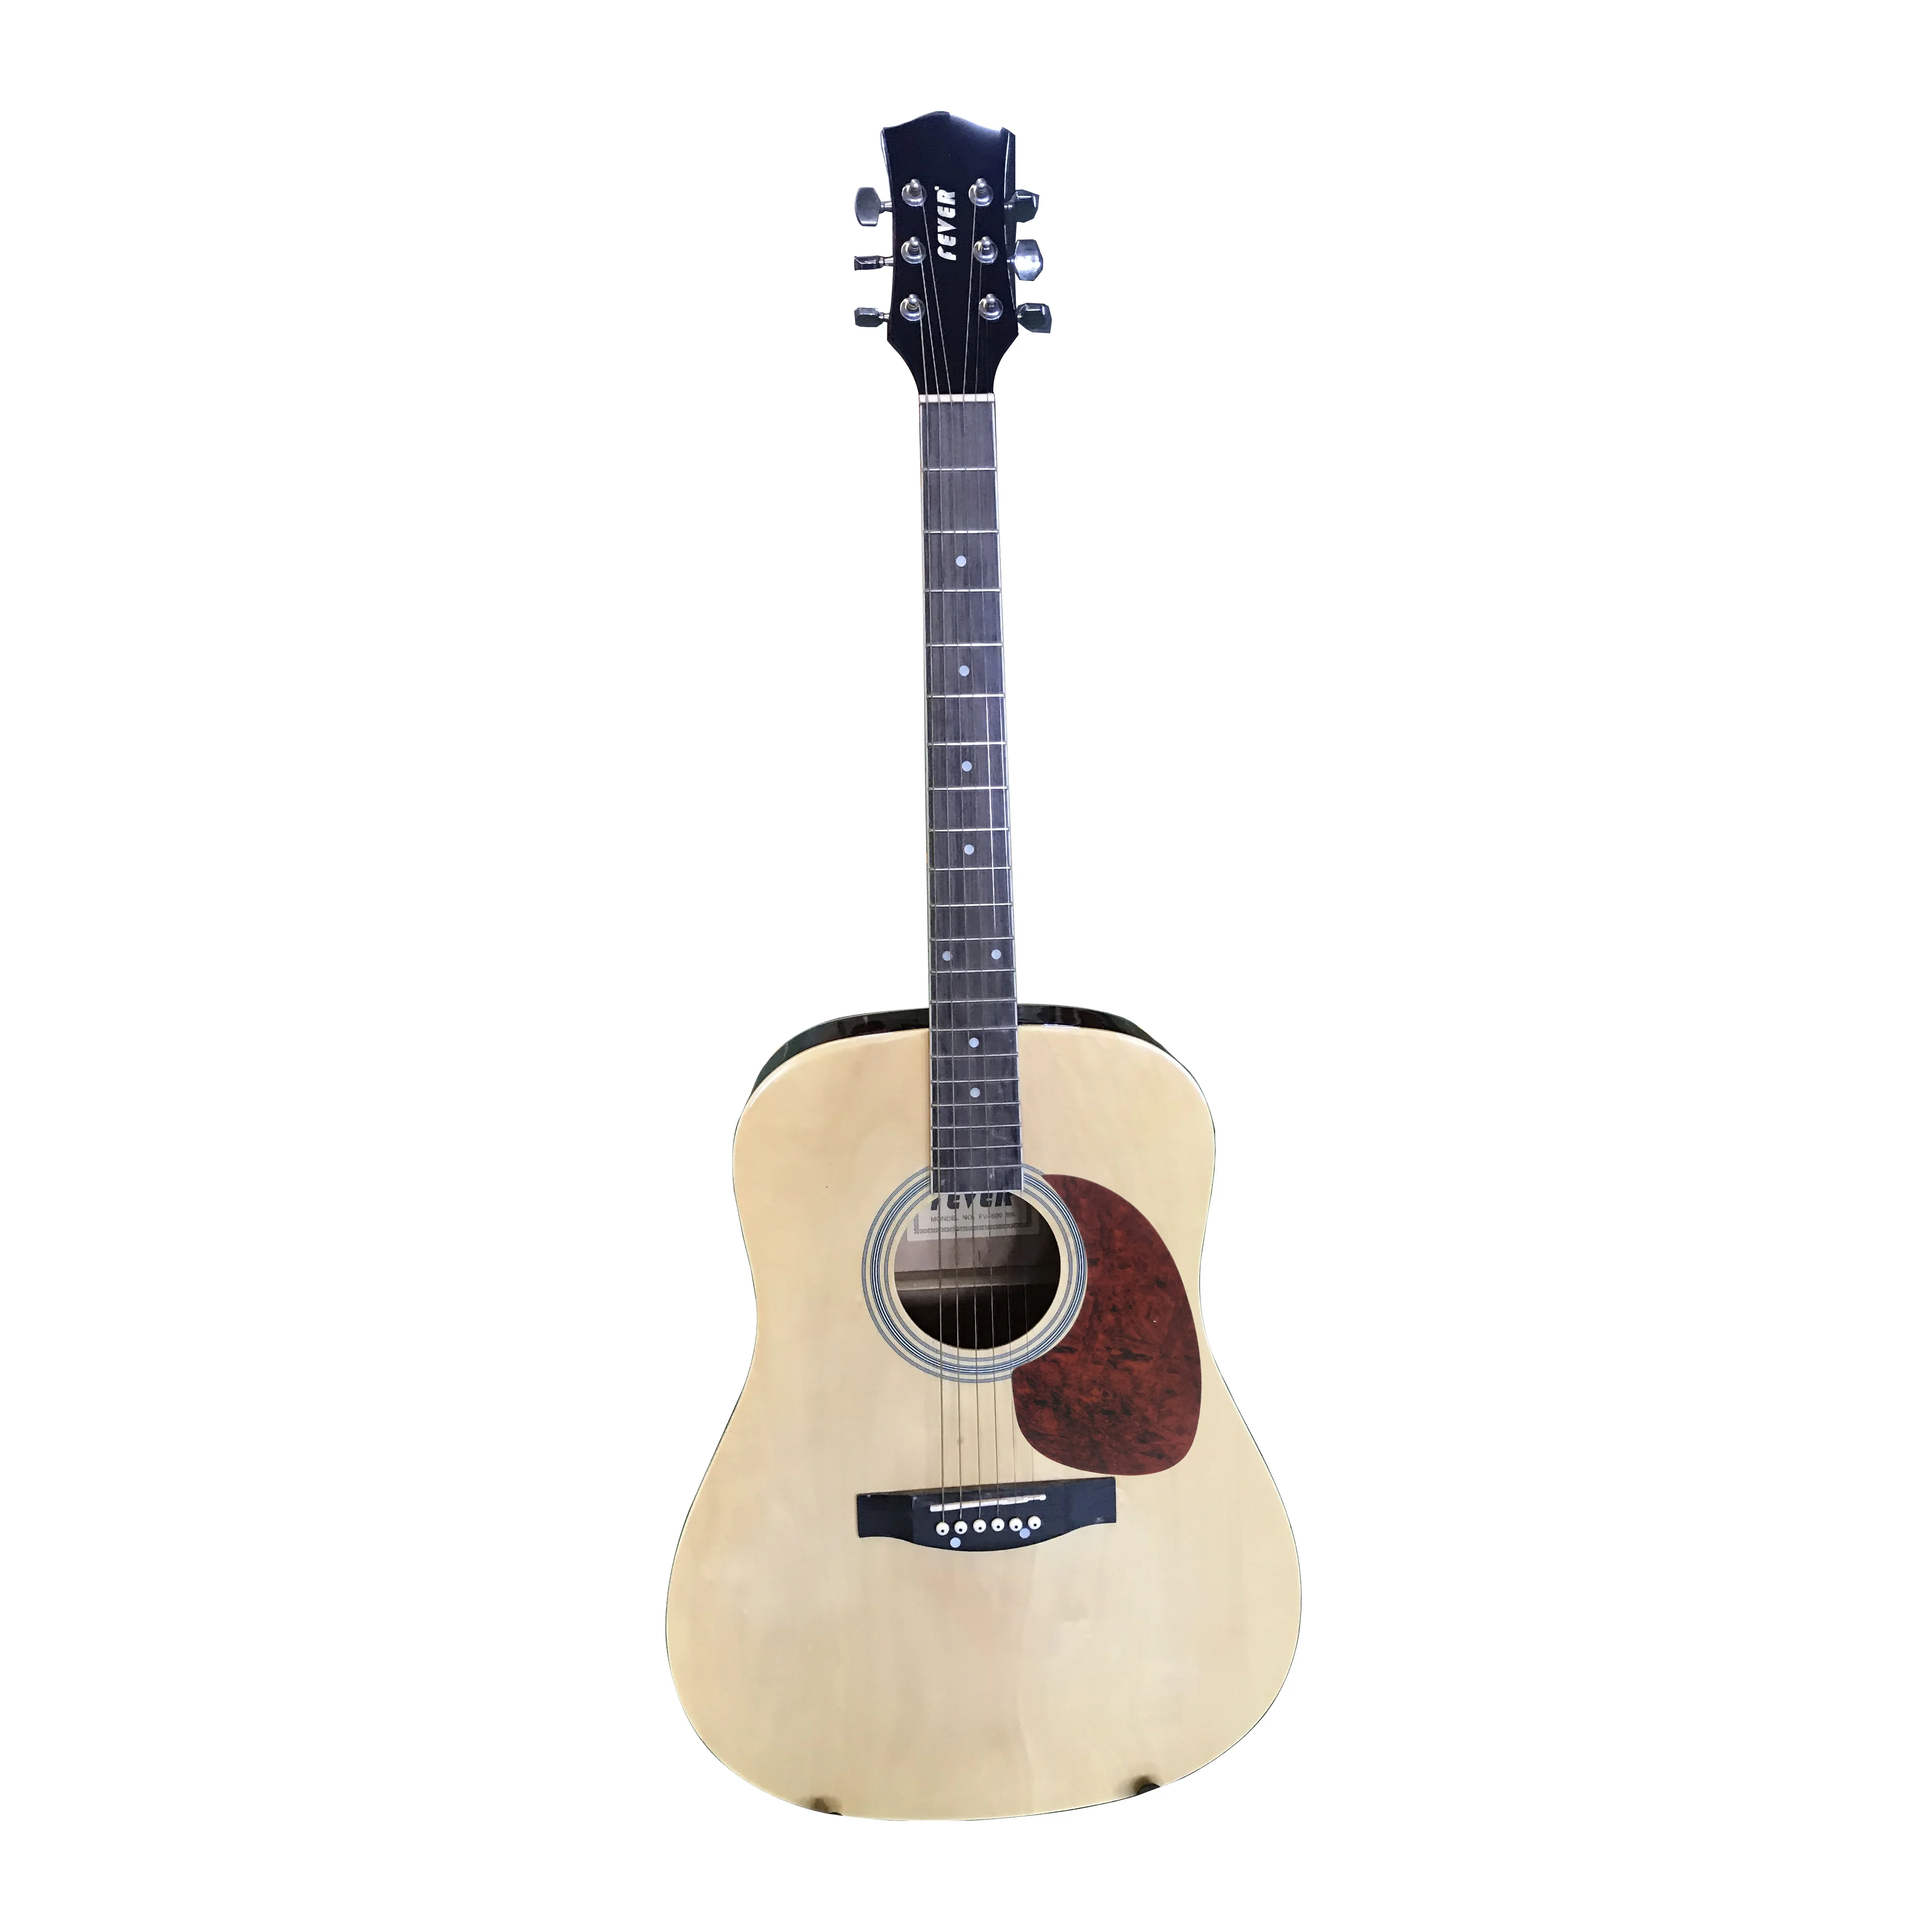 

HighQuality Newest 41 inch 6 strings wooden classical guitar folk acoustic guitar fashion wood edge veneer folk acoustic guitar